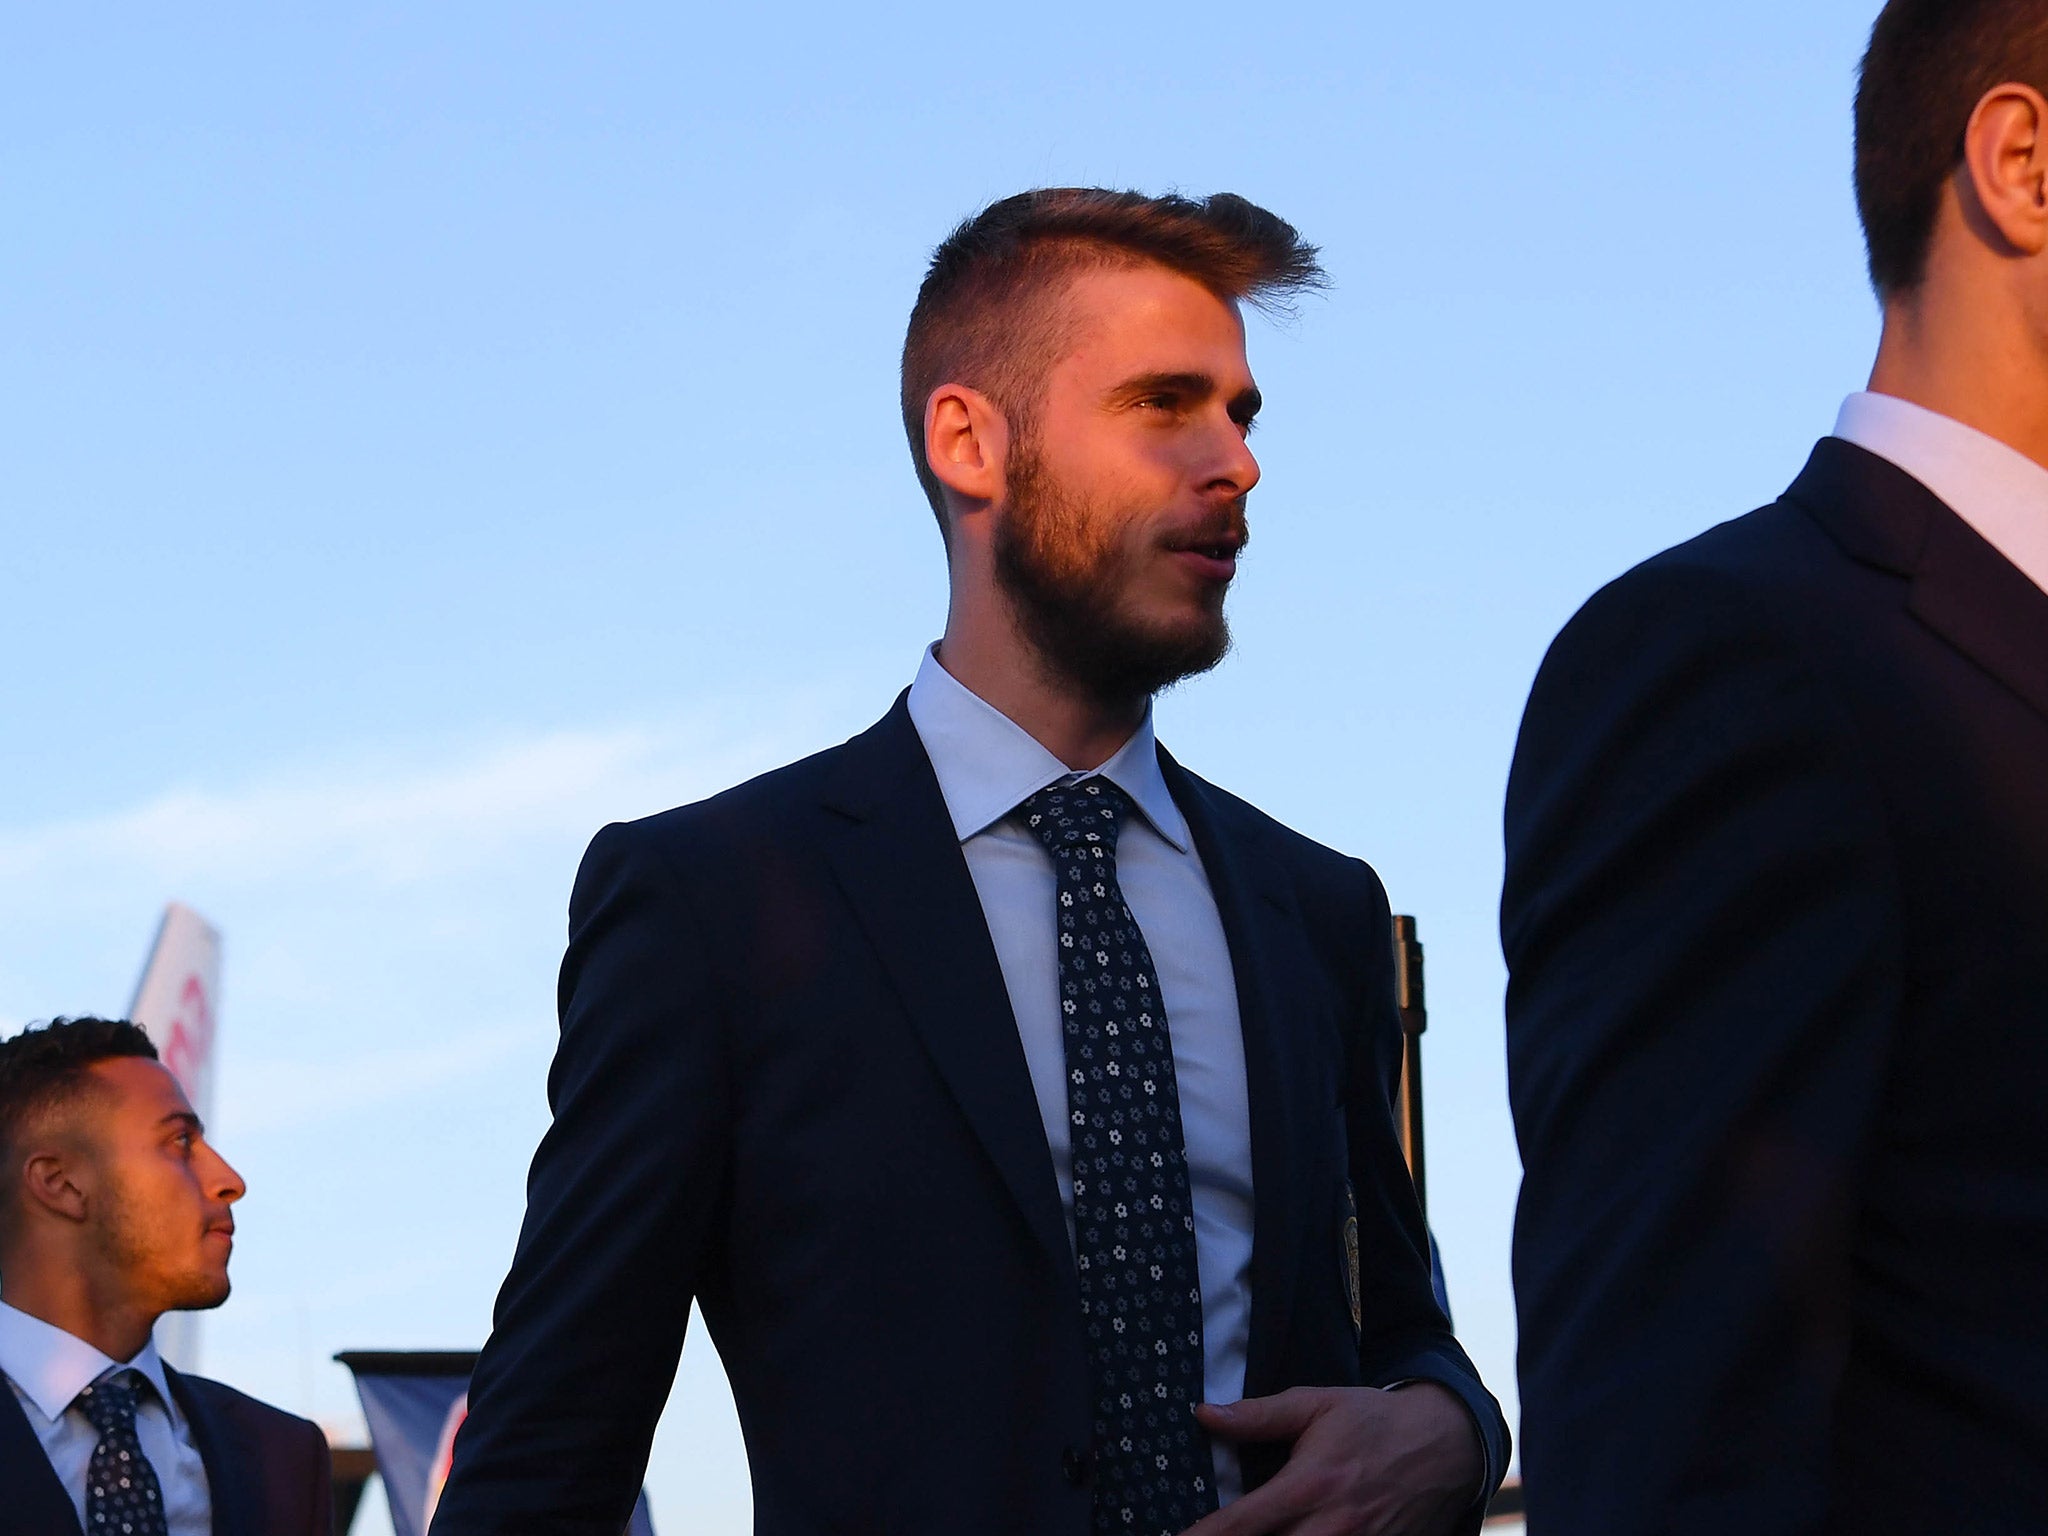 De Gea has denied all allegations of wrongdoing in a Spanish court case